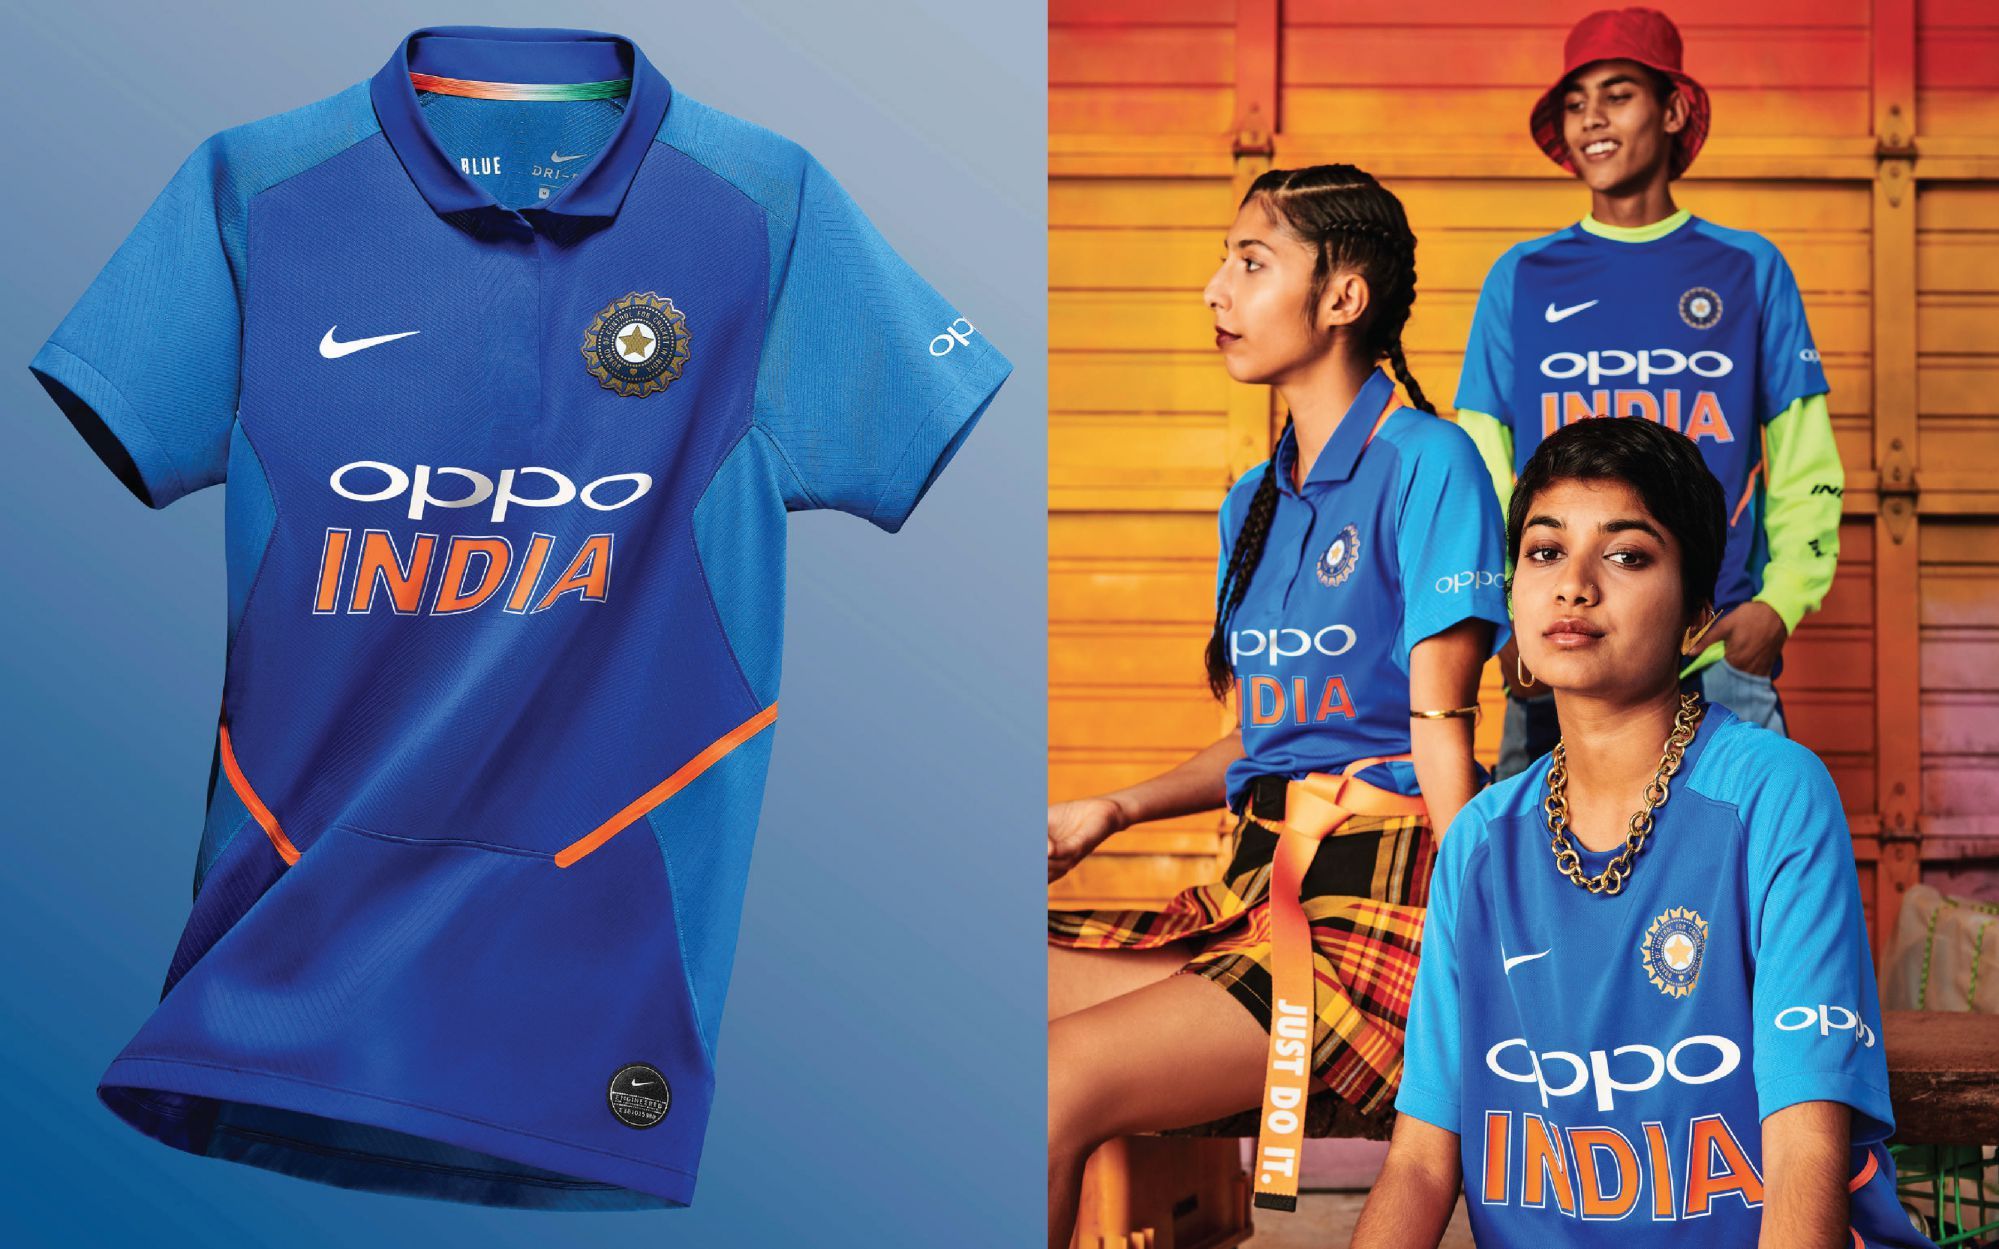 The new Nike's jersey for the Indian National cricket team